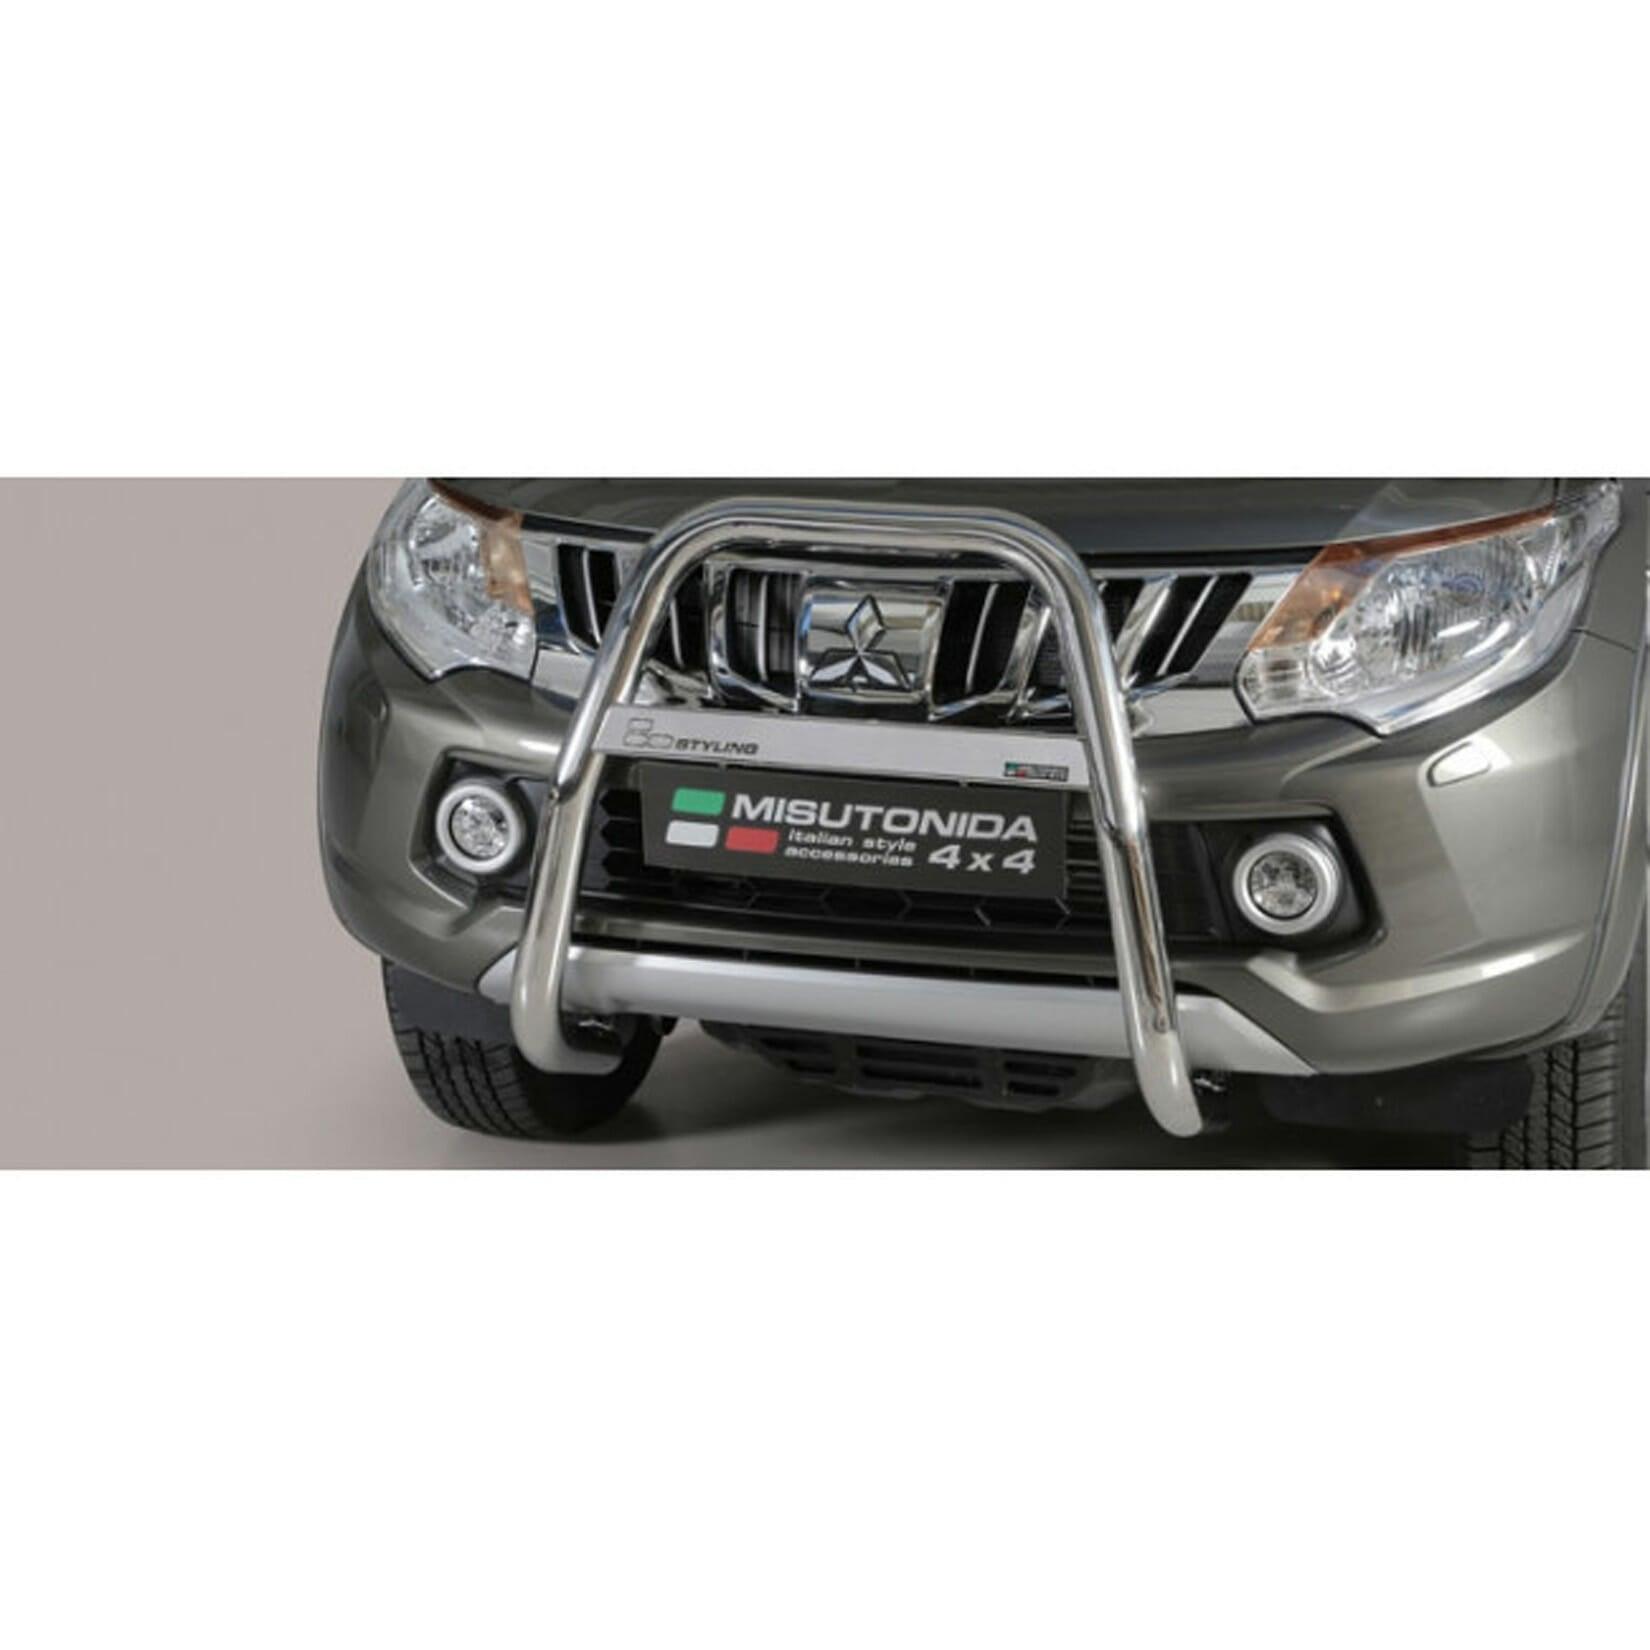 MITSUBISHI L200 SERIES 5 2015 ON - MISUTONIDA HIGH FRONT A-BAR - 63MM - STAINLESS FINISH - Storm Xccessories2